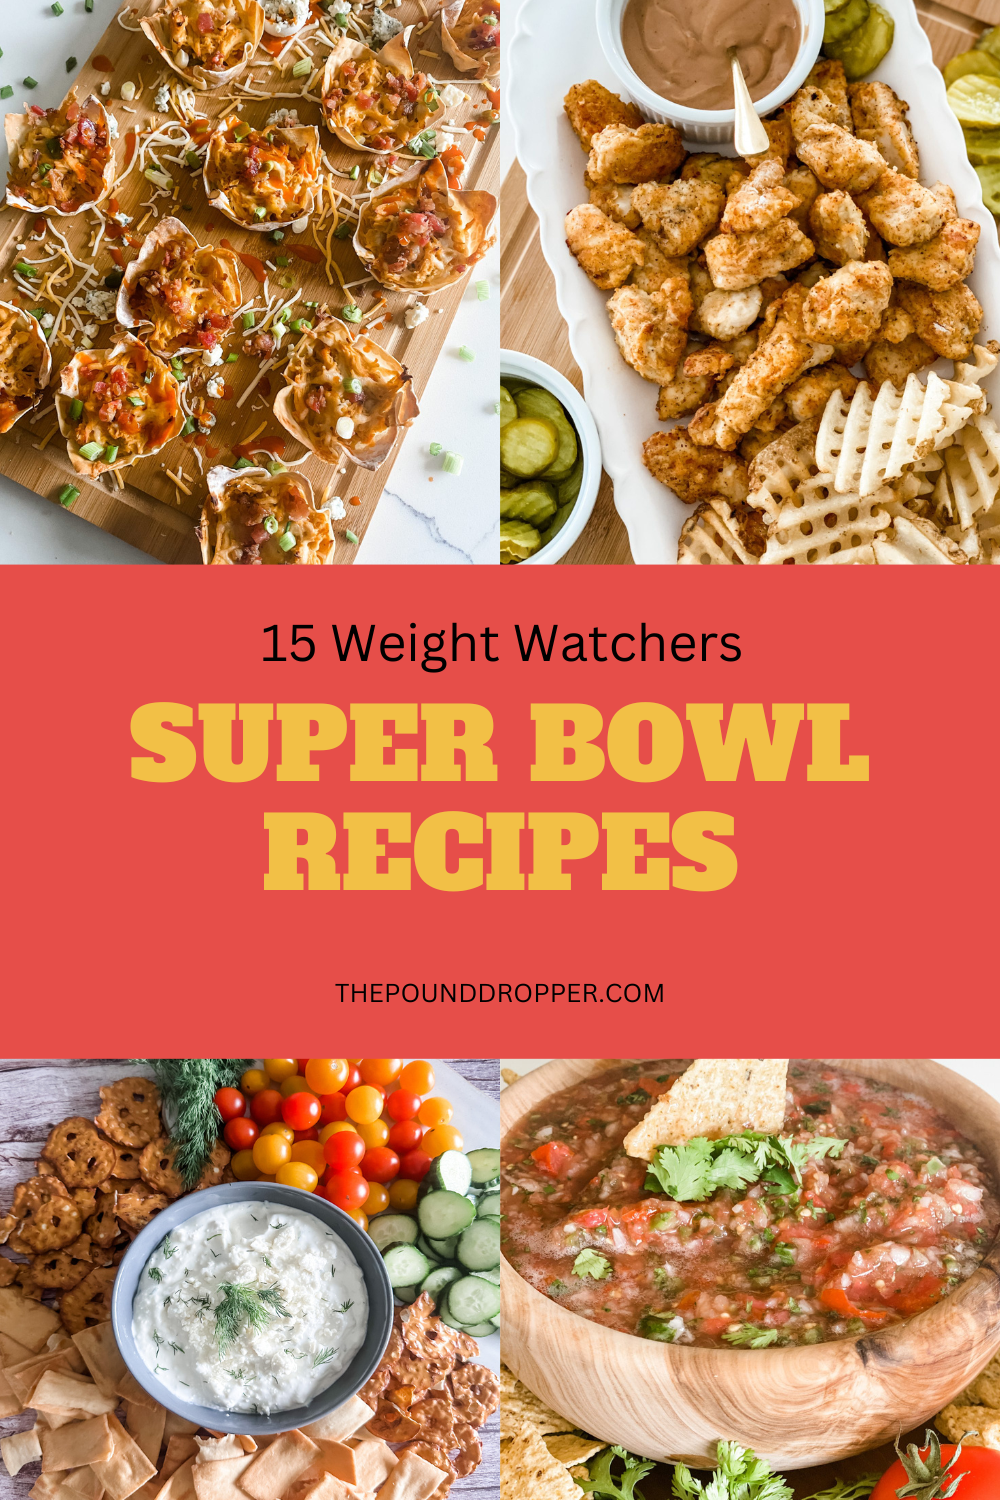 Whether you're watching the Super Bowl or just there for the food, these Delicious Weight Watchers Super Bowl Recipes are sure to satisfy your game day cravings without jeopardizing your goals! via @pounddropper